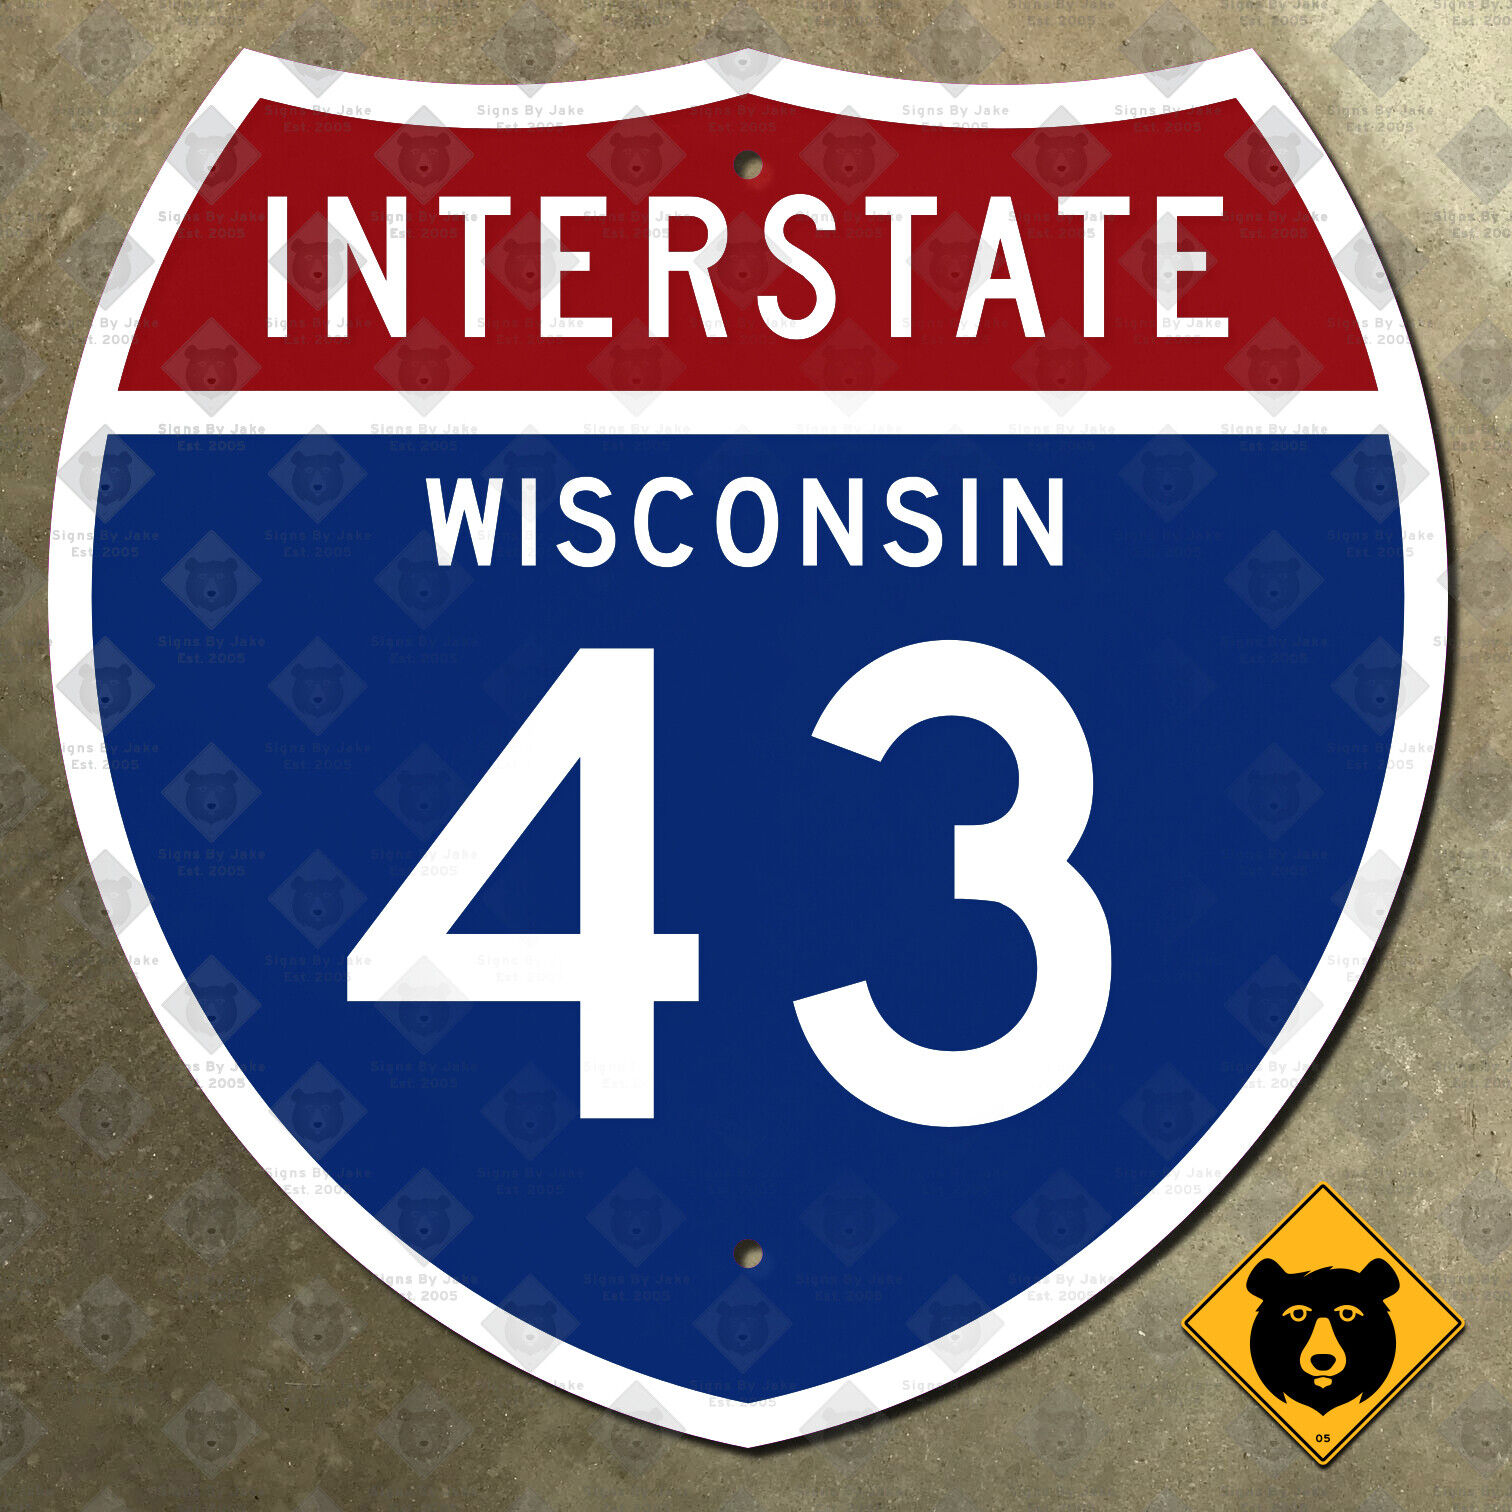 Wisconsin interstate route 43 highway marker road sign 1957 Green Bay 18x18